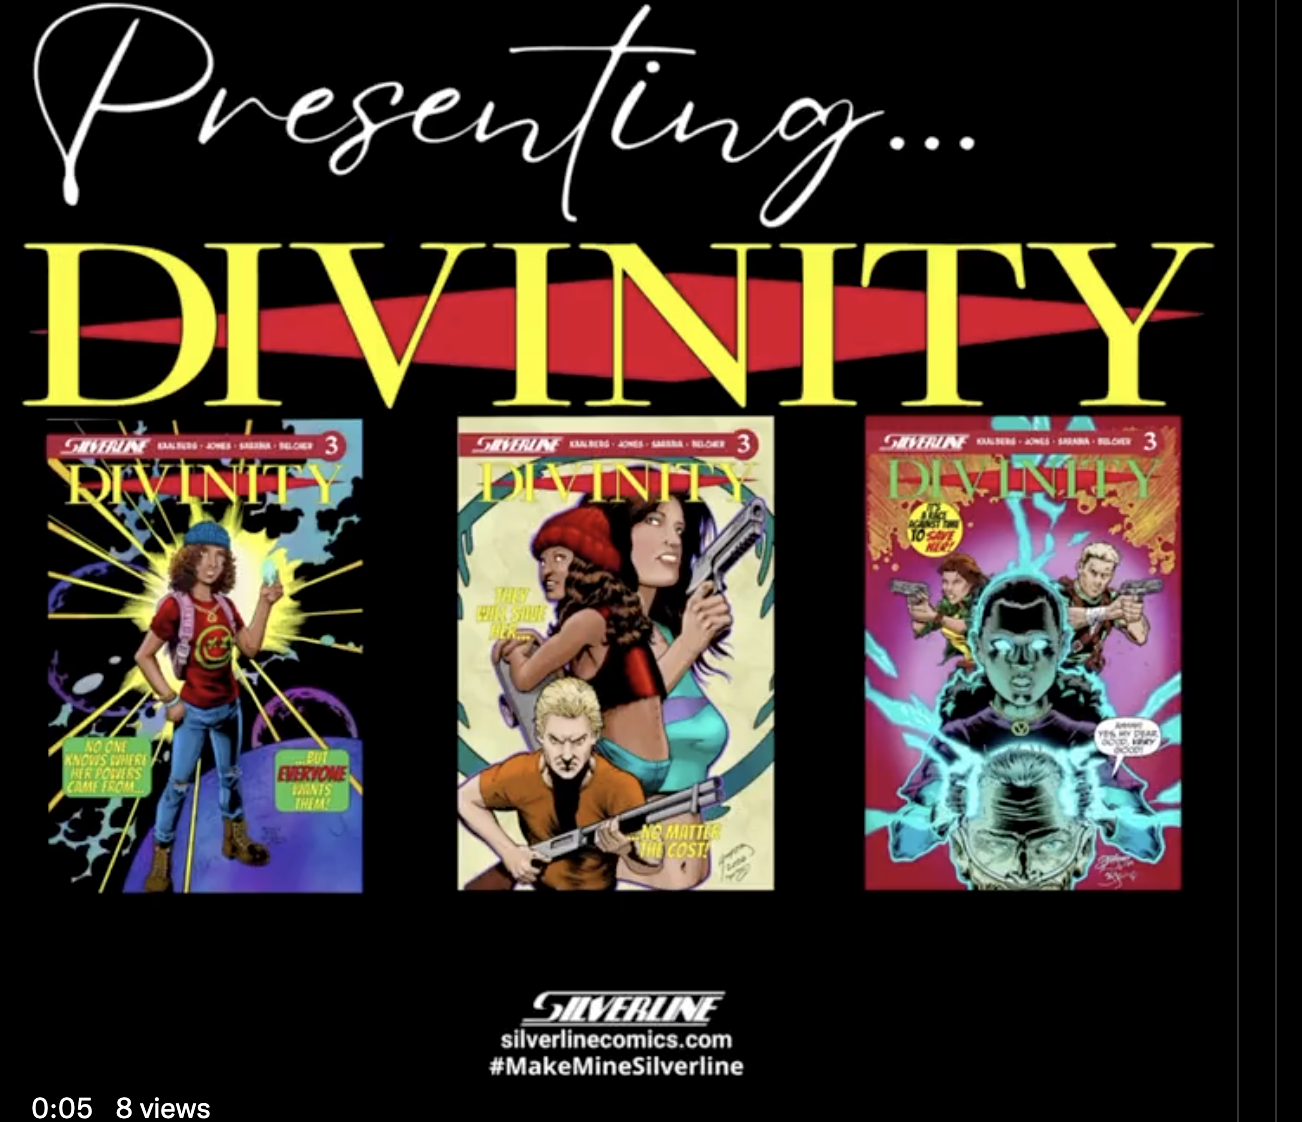 NOW THIS: The 3rd issue of the award winning comic, Divinity, is now available on Kickstarter.